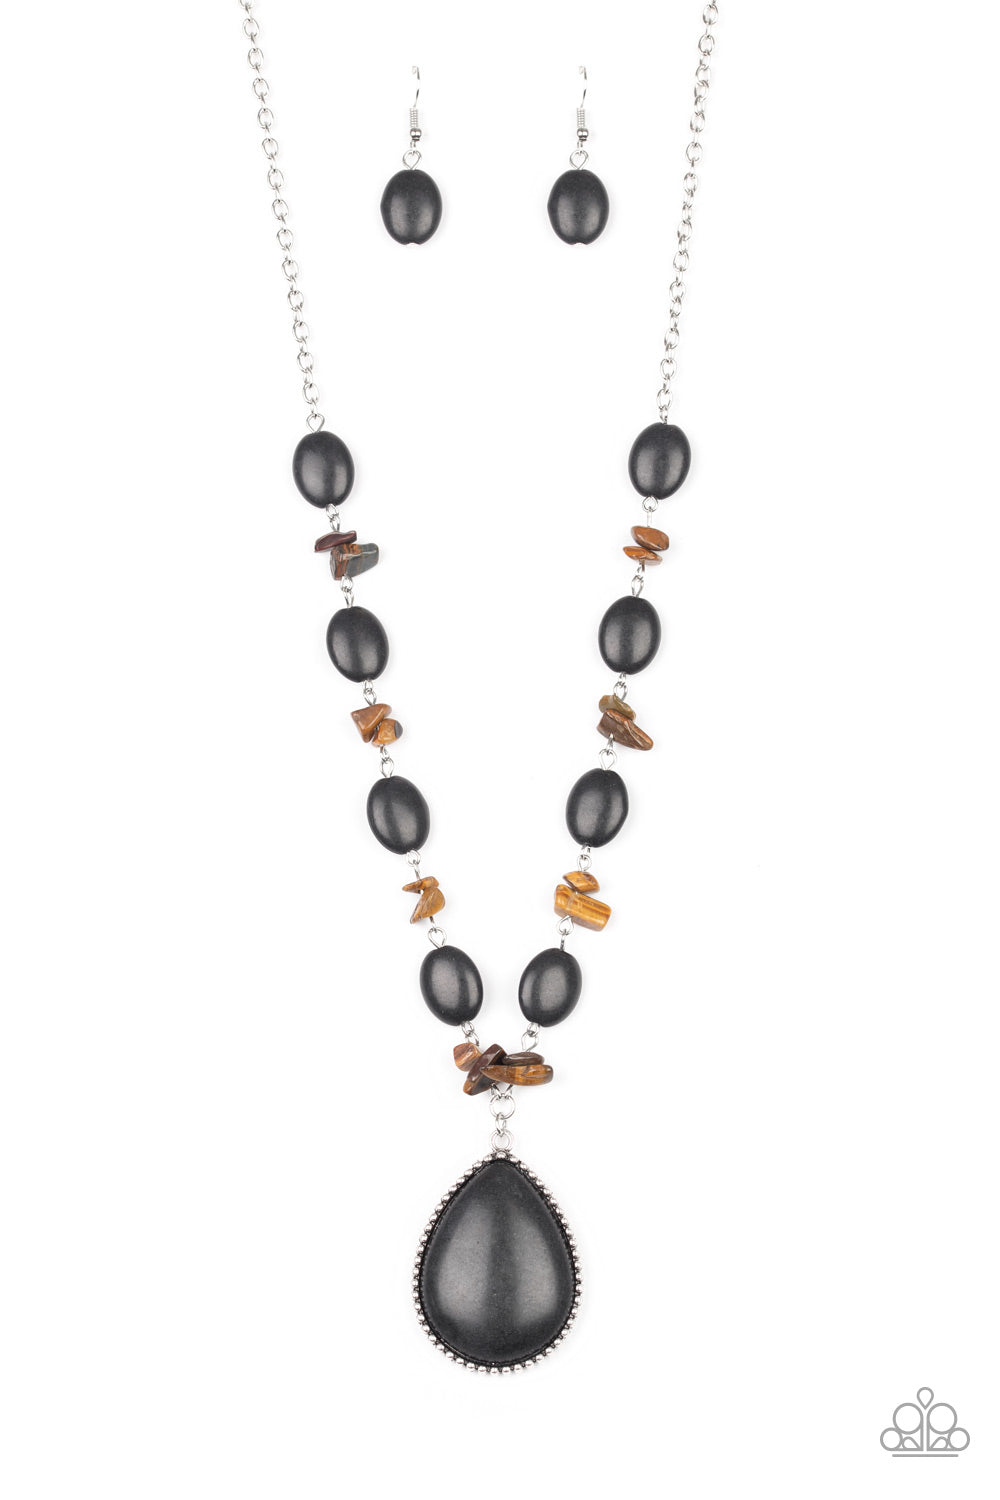 Black Stones,With Pearls,Black Tread,Thilagam&Square Moon,Stud Earrings  Design Matte Finish Necklace Set Buy Online